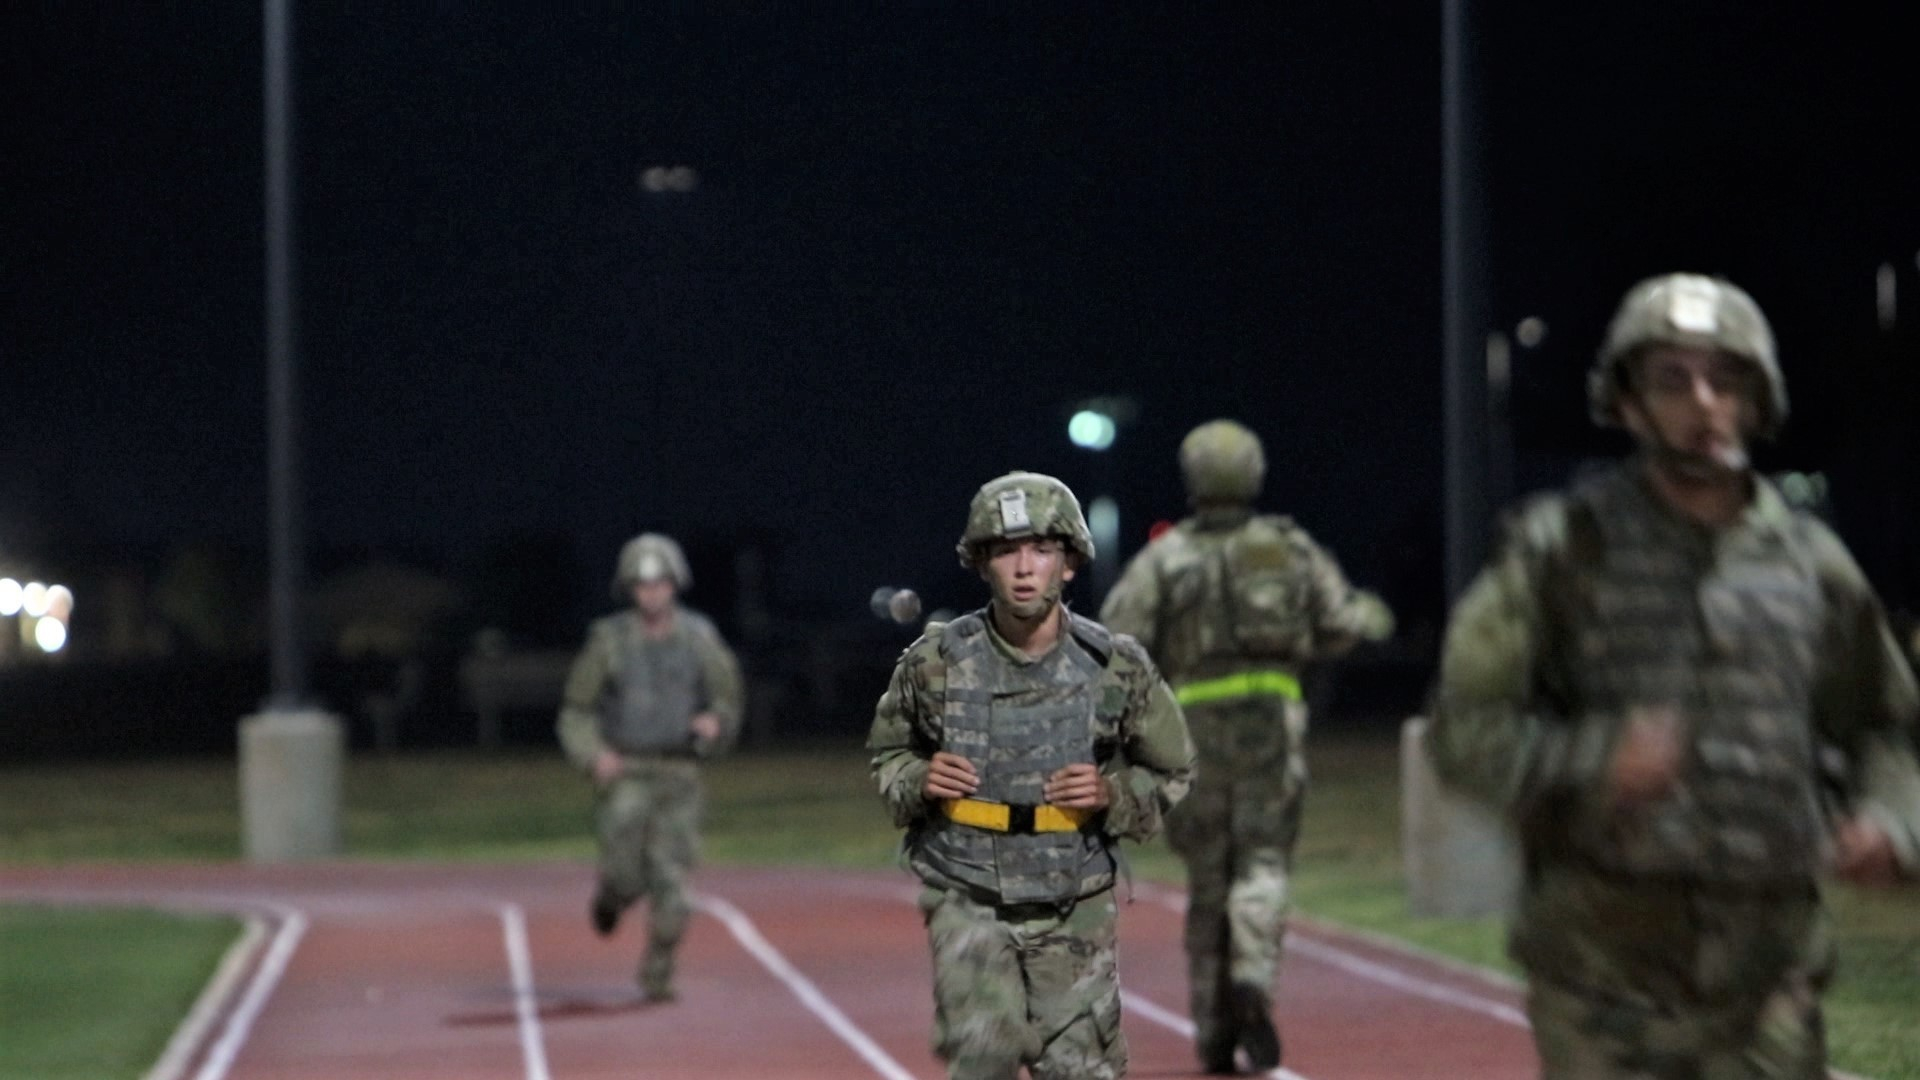 1920x1080 Fort Sill AIT students take on Ranger challenge in PT | Article | The United States Army